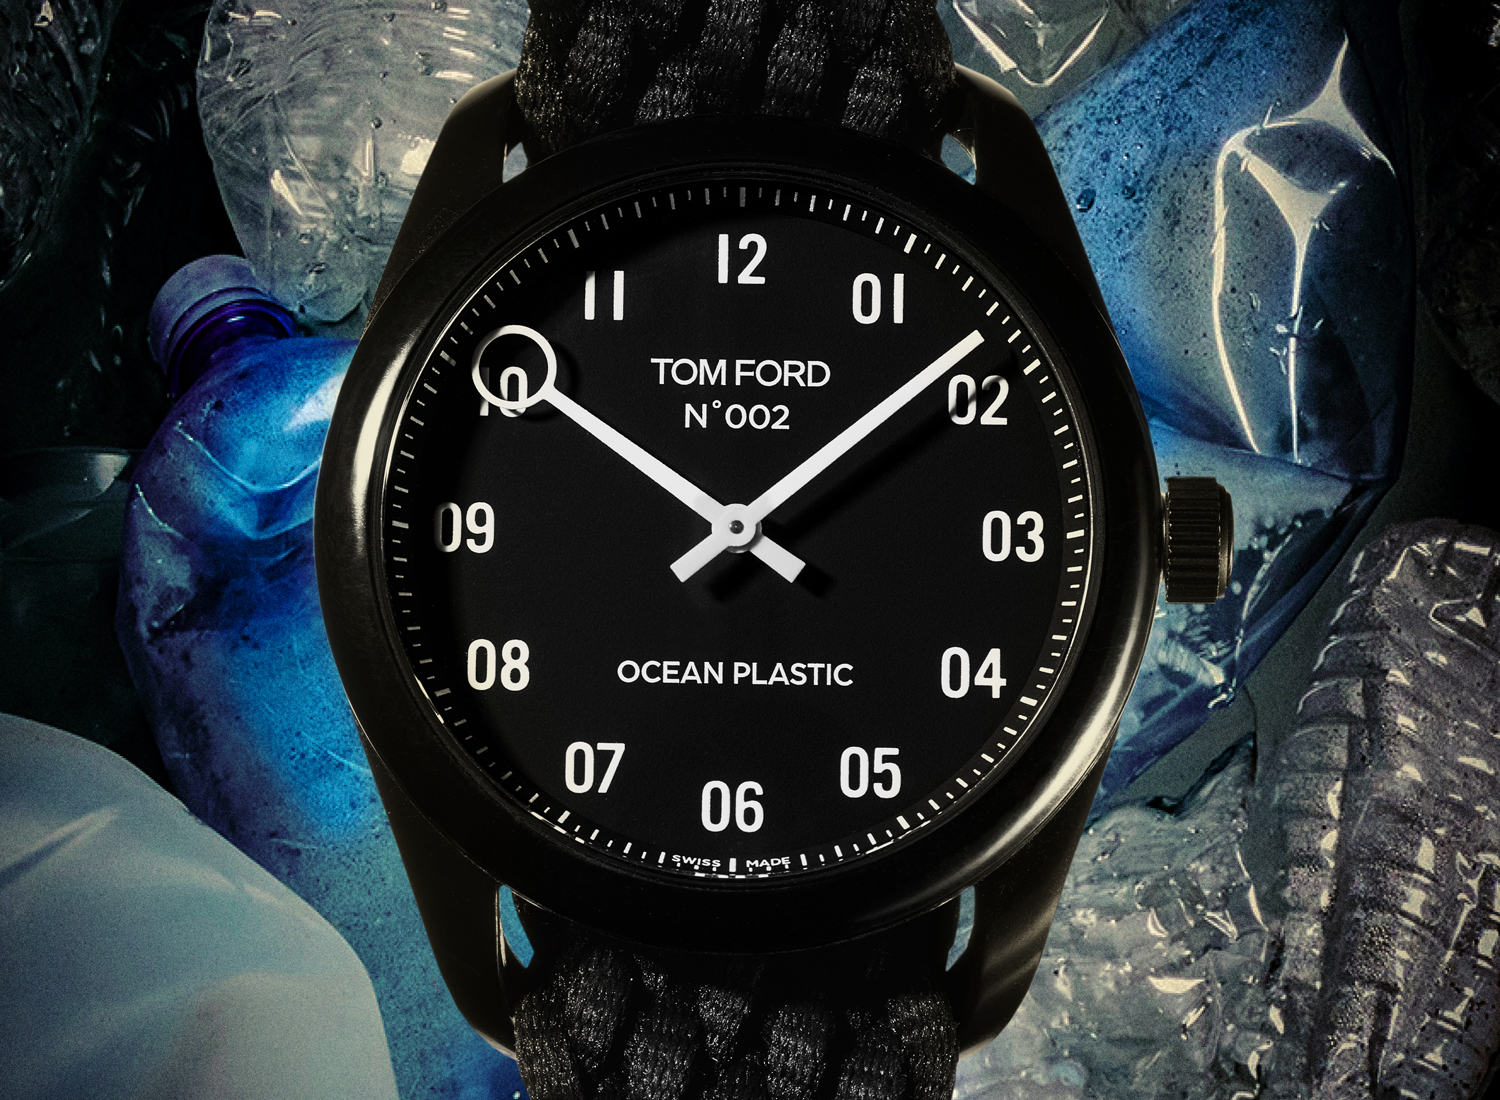 Tom ford ocean plastic watch photo credit ted morrison 1